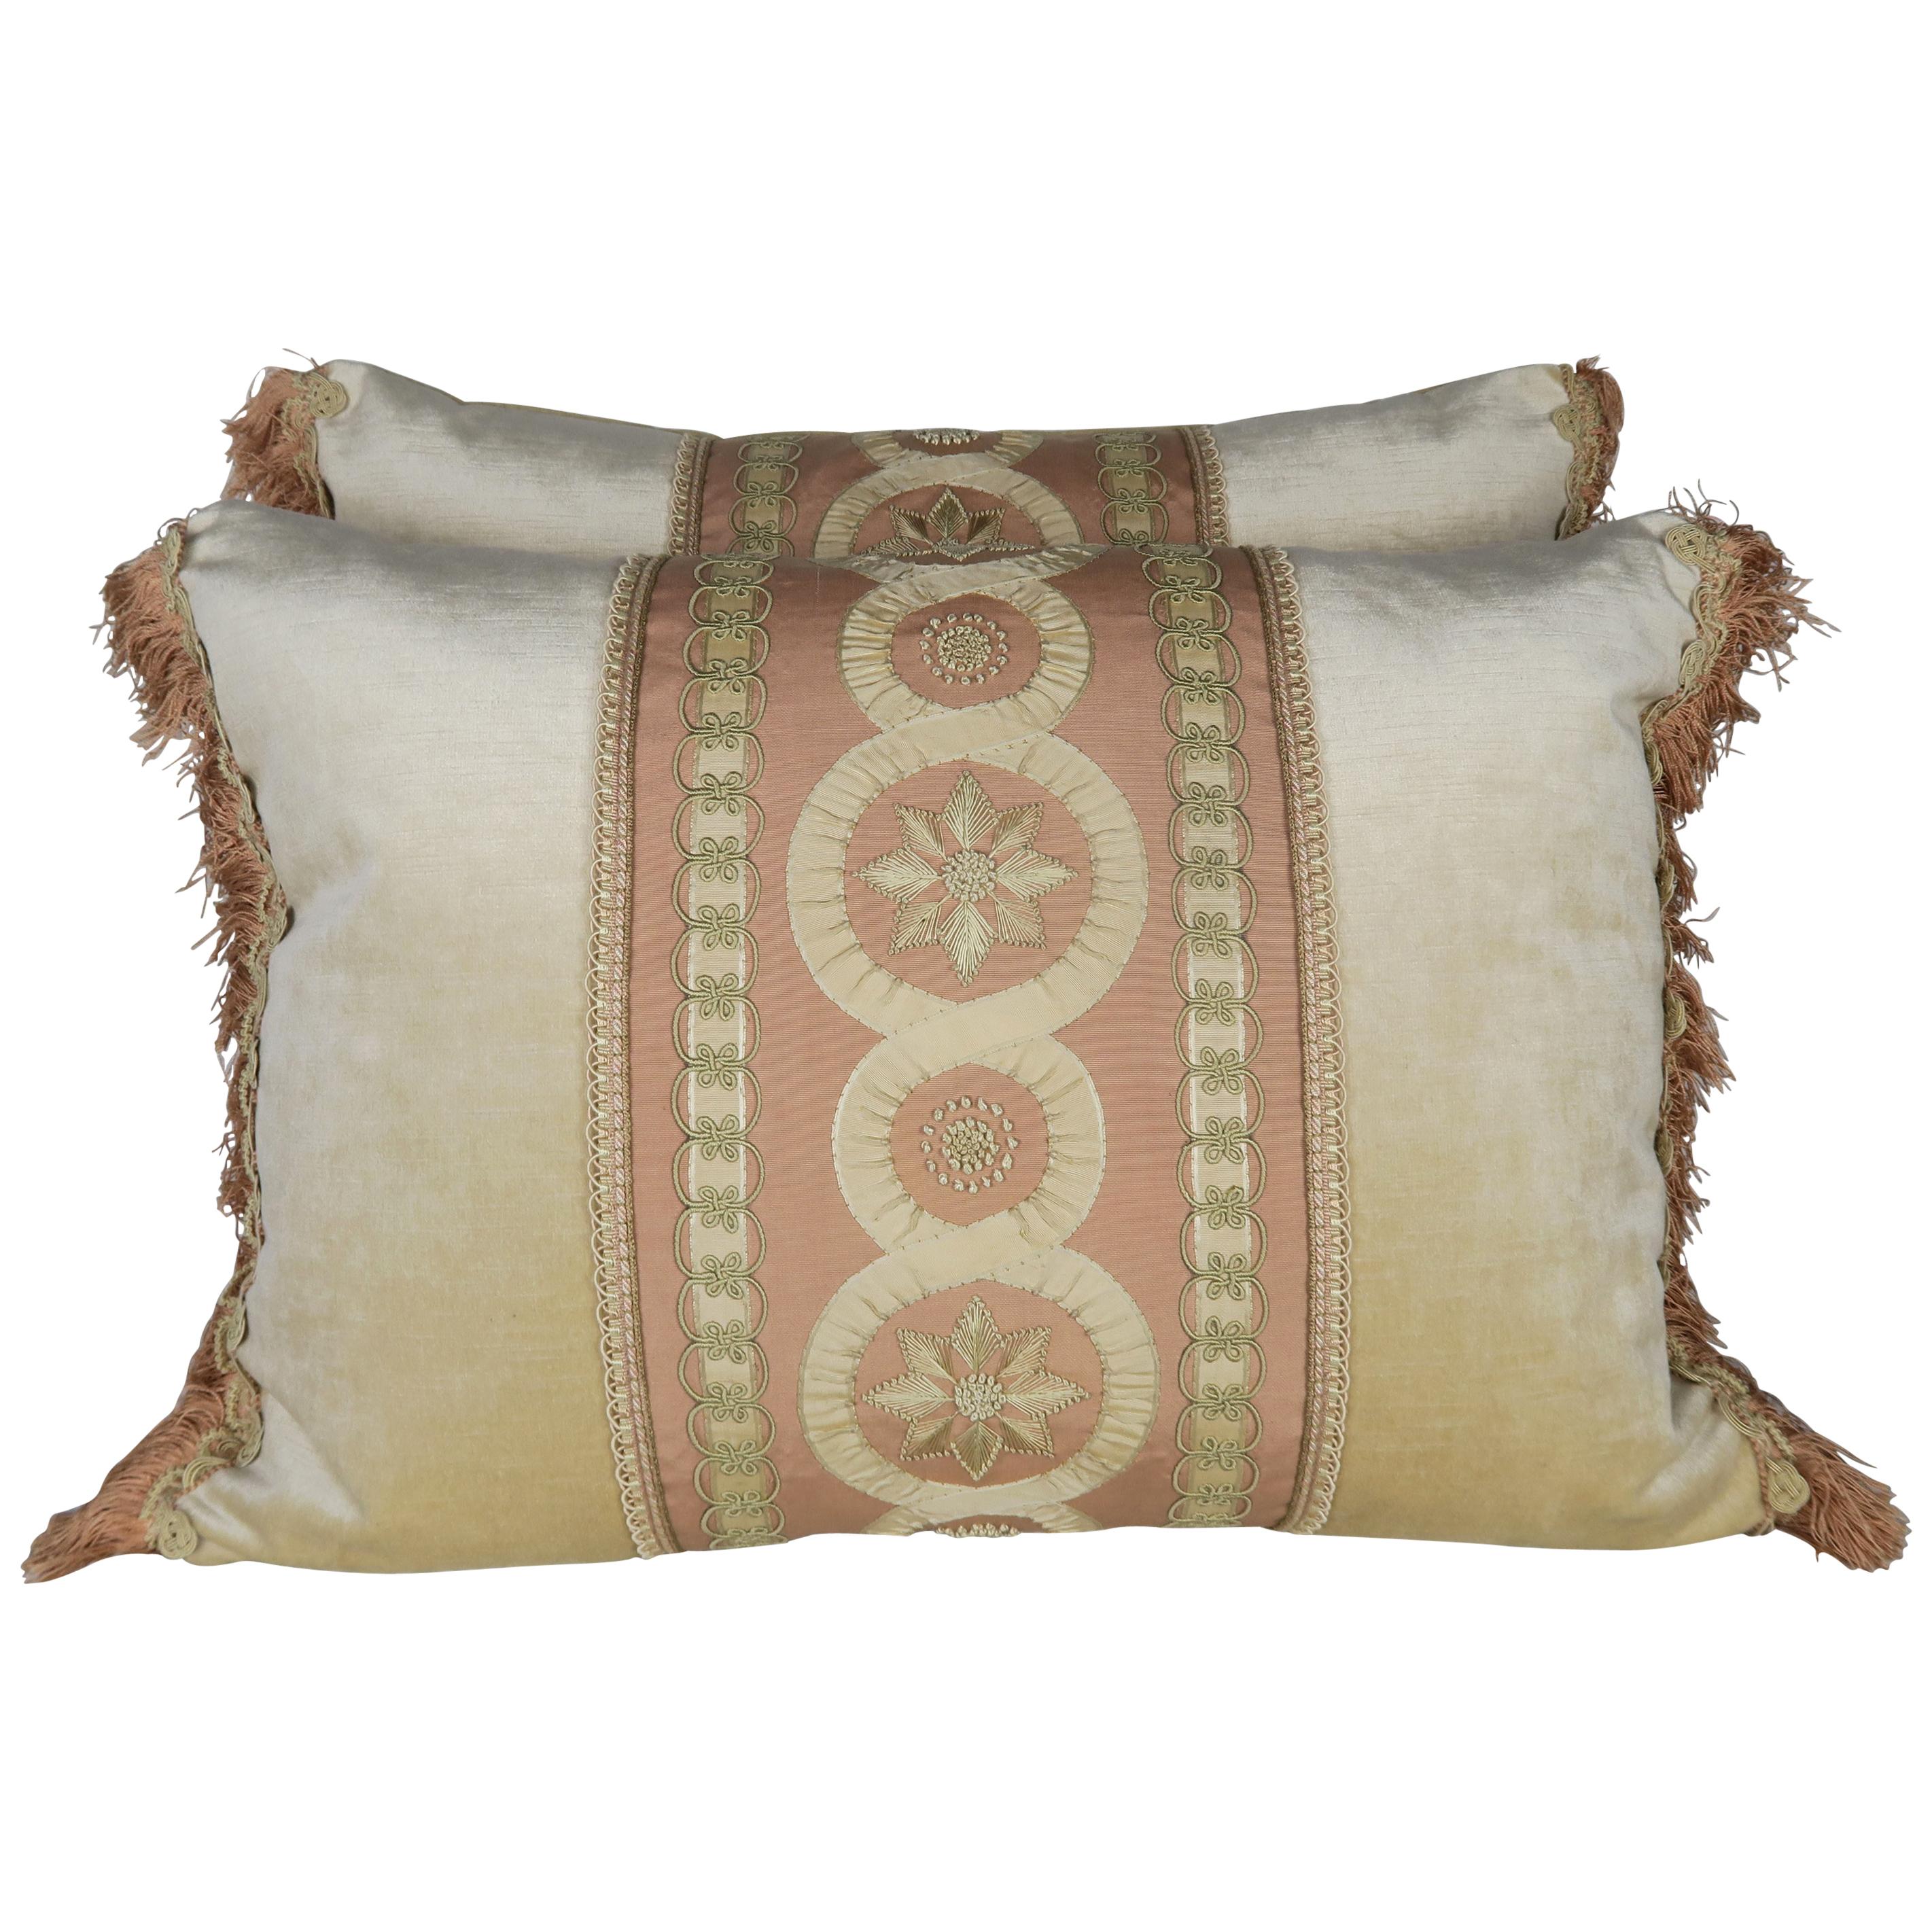 19th Century Embroidered Silk and Velvet Pillows by Melissa Levinson